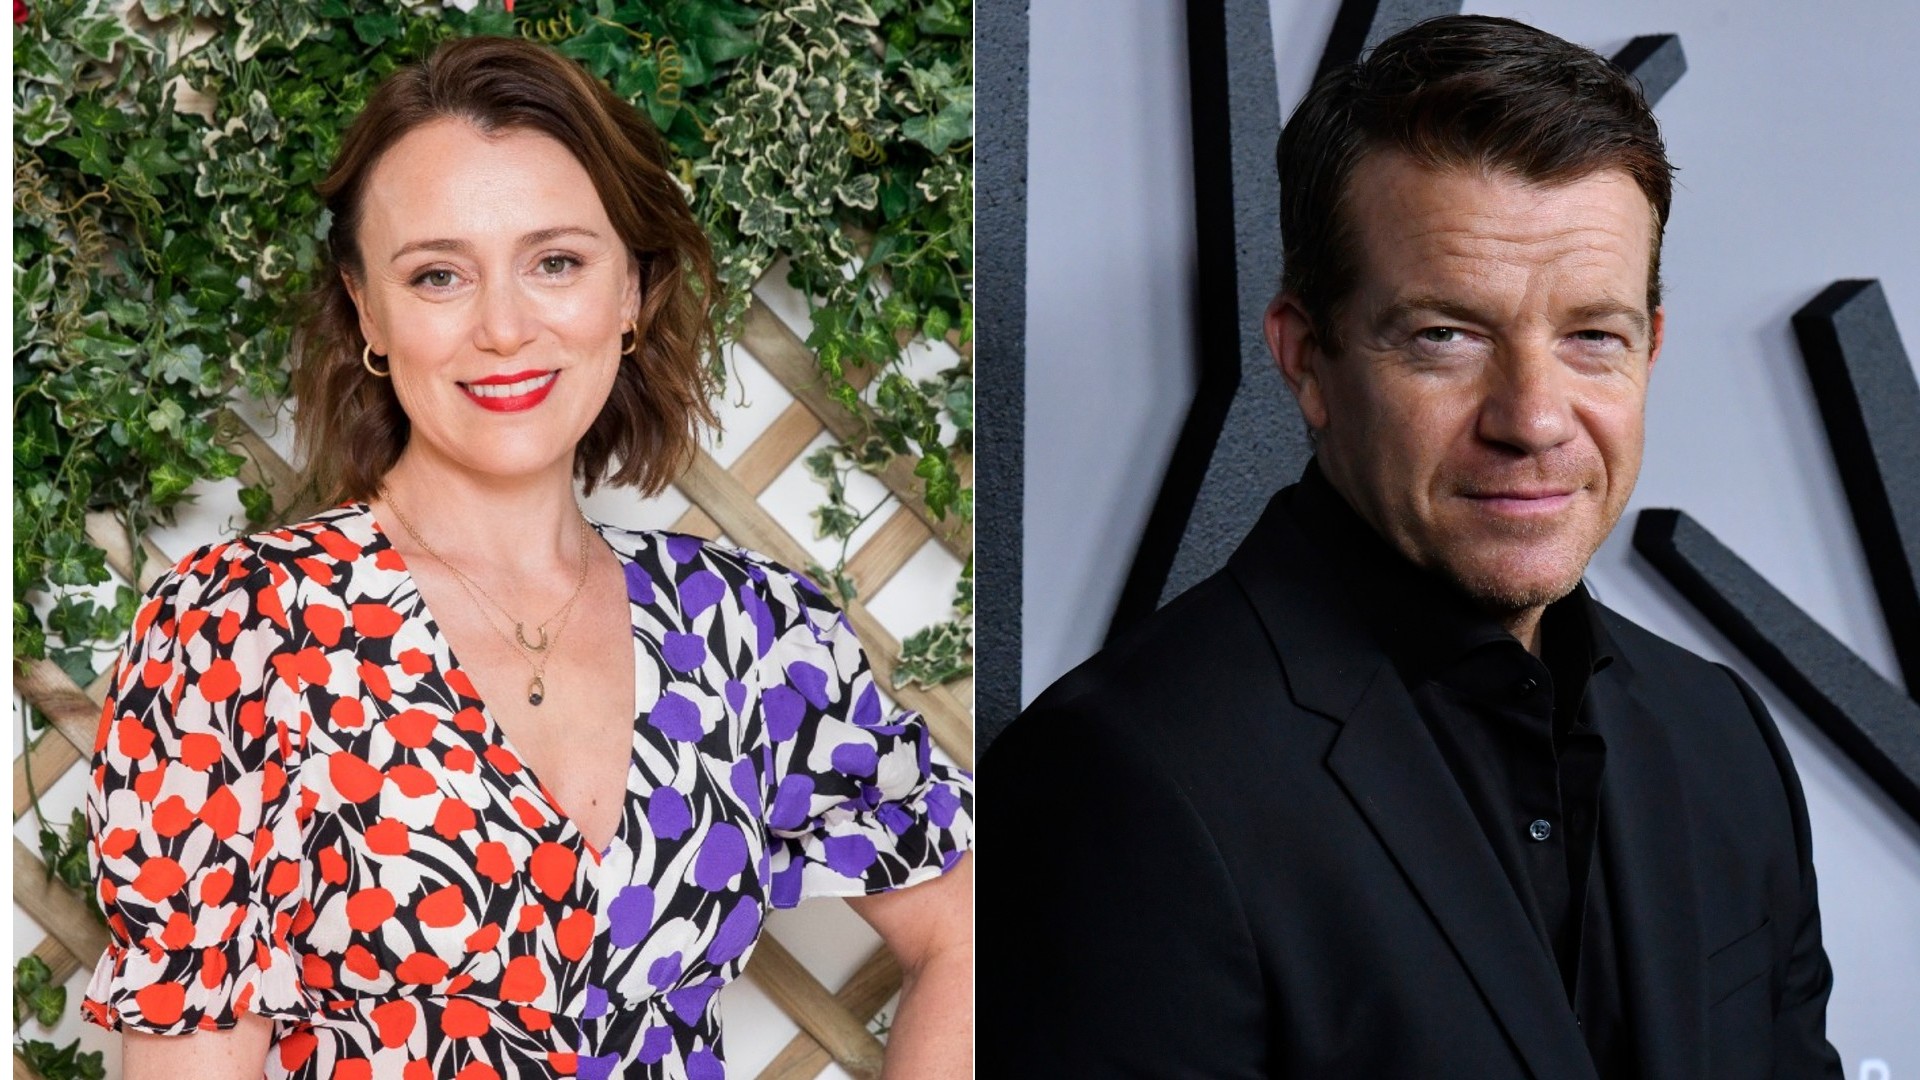 Casting News: Keeley Hawes and Max Beesley to Lead TV Adaptation of John Wyndham's 'The Midwich Cuckoos'